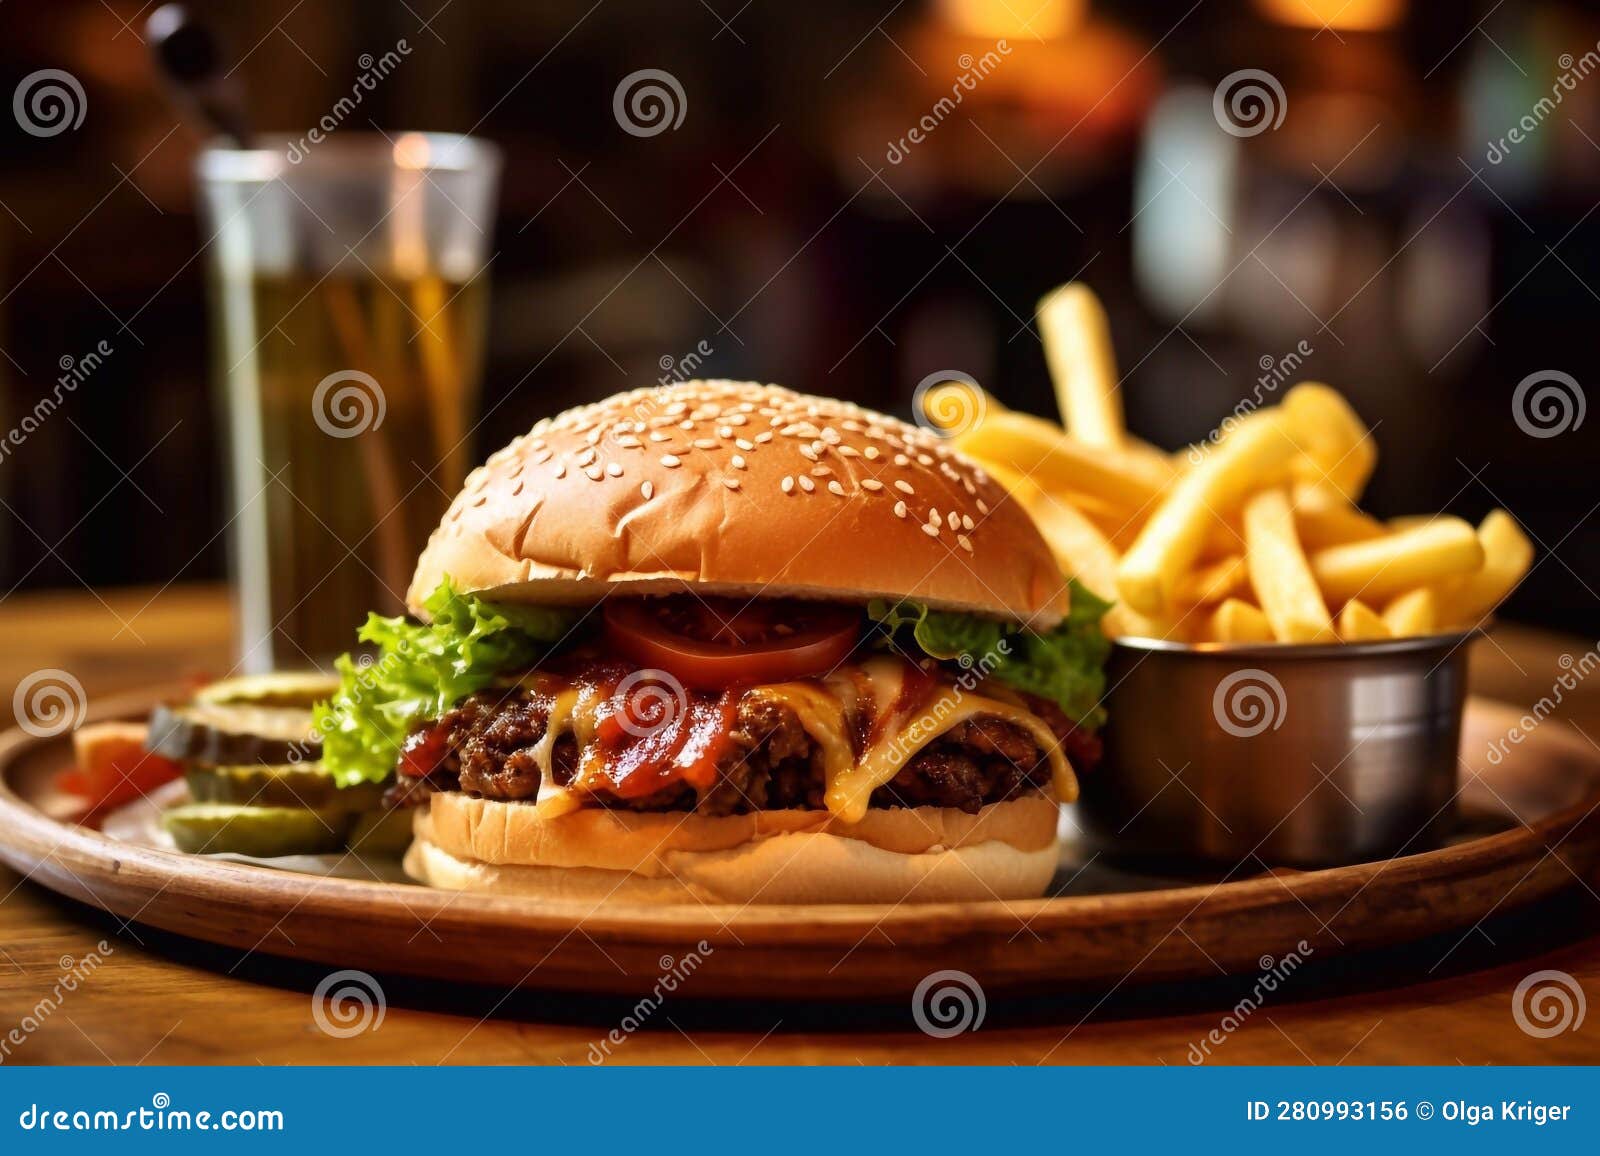 Sloppy Joe Burger with French Fries on a Plate Stock Illustration ...